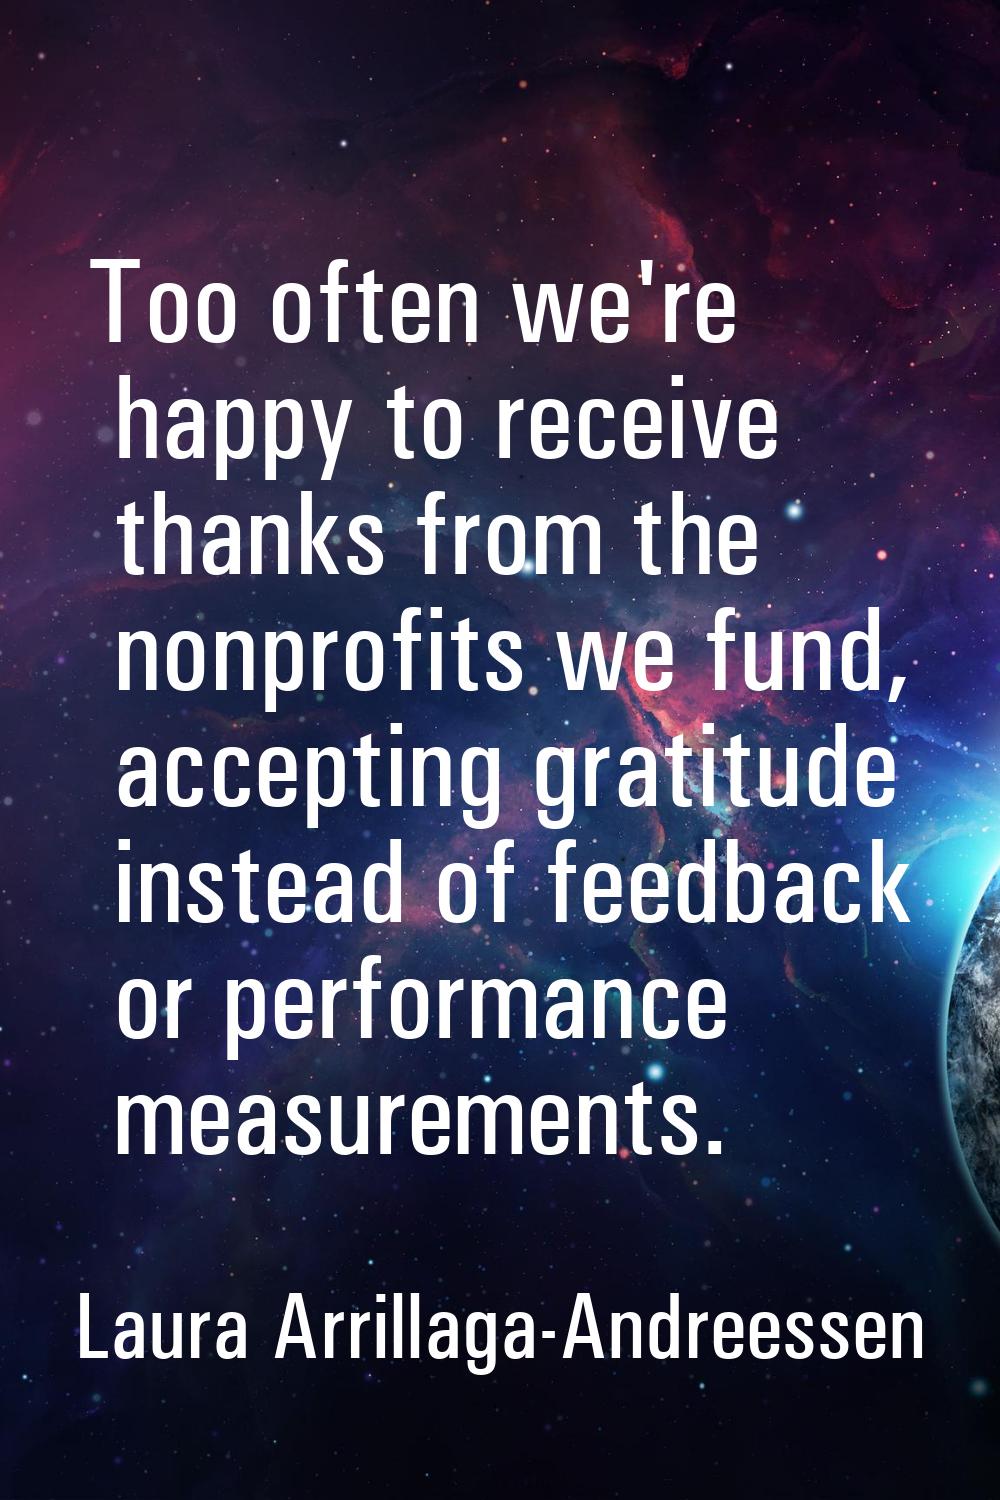 Too often we're happy to receive thanks from the nonprofits we fund, accepting gratitude instead of